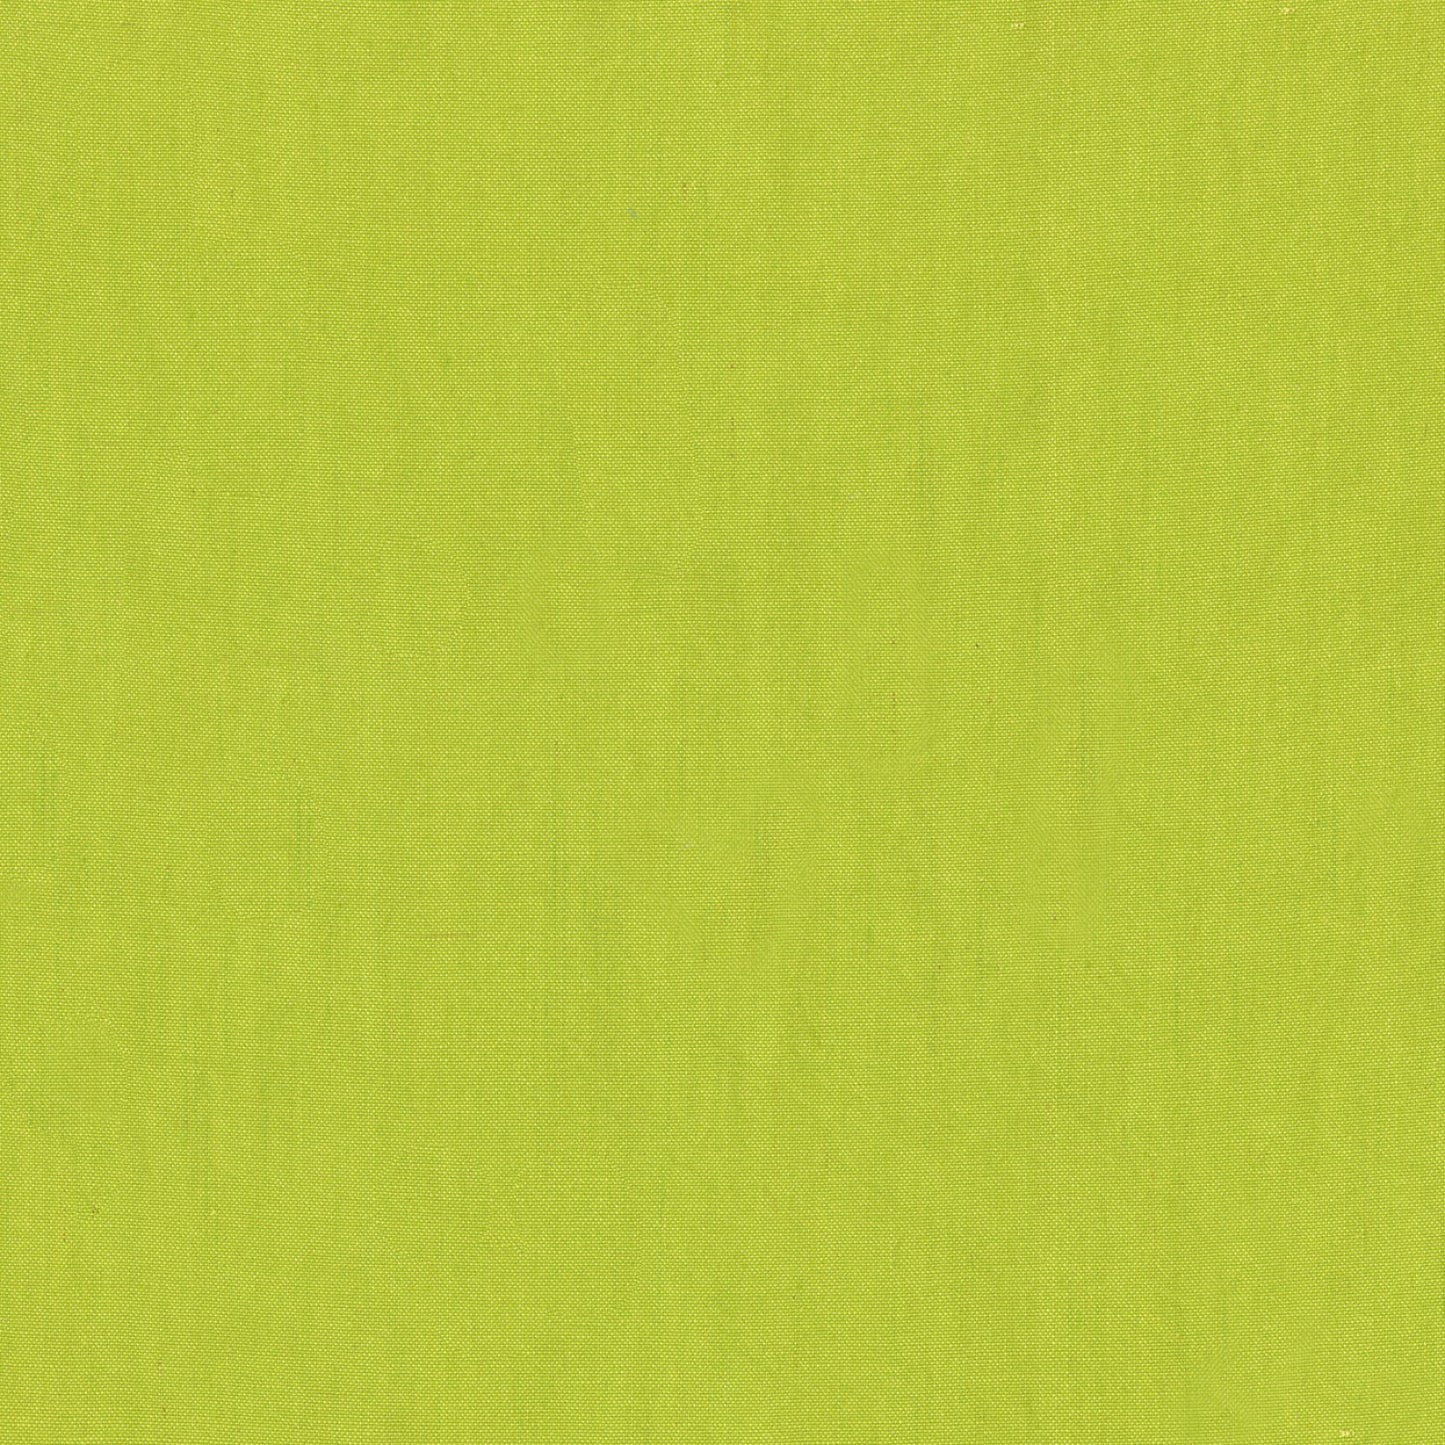 Manufacturer: Windham Fabrics Designer: Another Point of View Collection: Artisan Solids Print Name: Apple Green/Chartreuse Material: 100% Cotton  Weight: Quilting  SKU: WIND 40171-87 Width: 44 inches